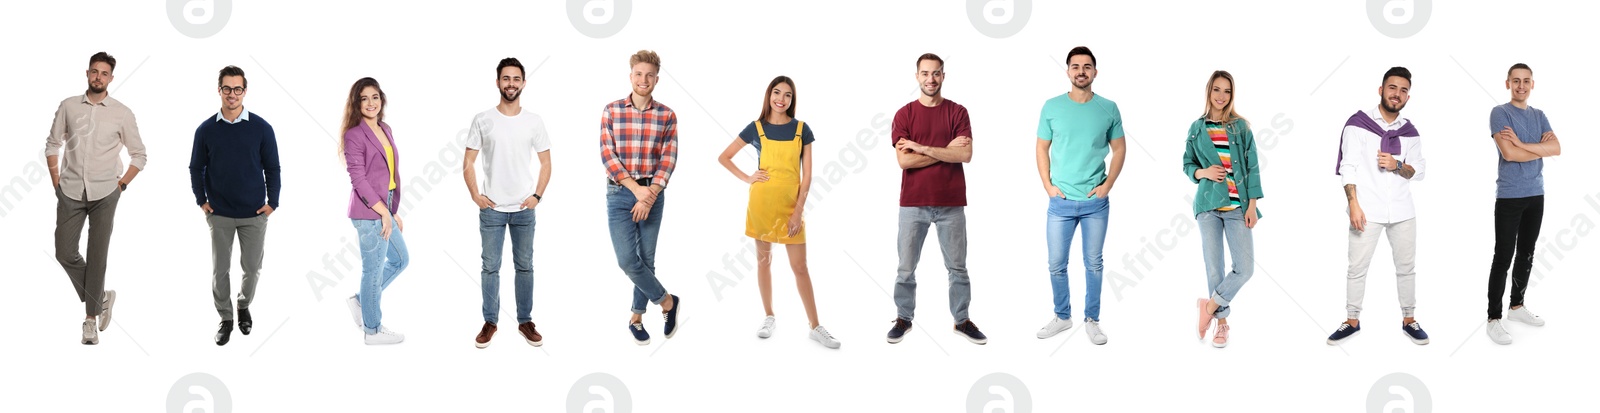 Image of Collage with full length portraits of men and women on white background